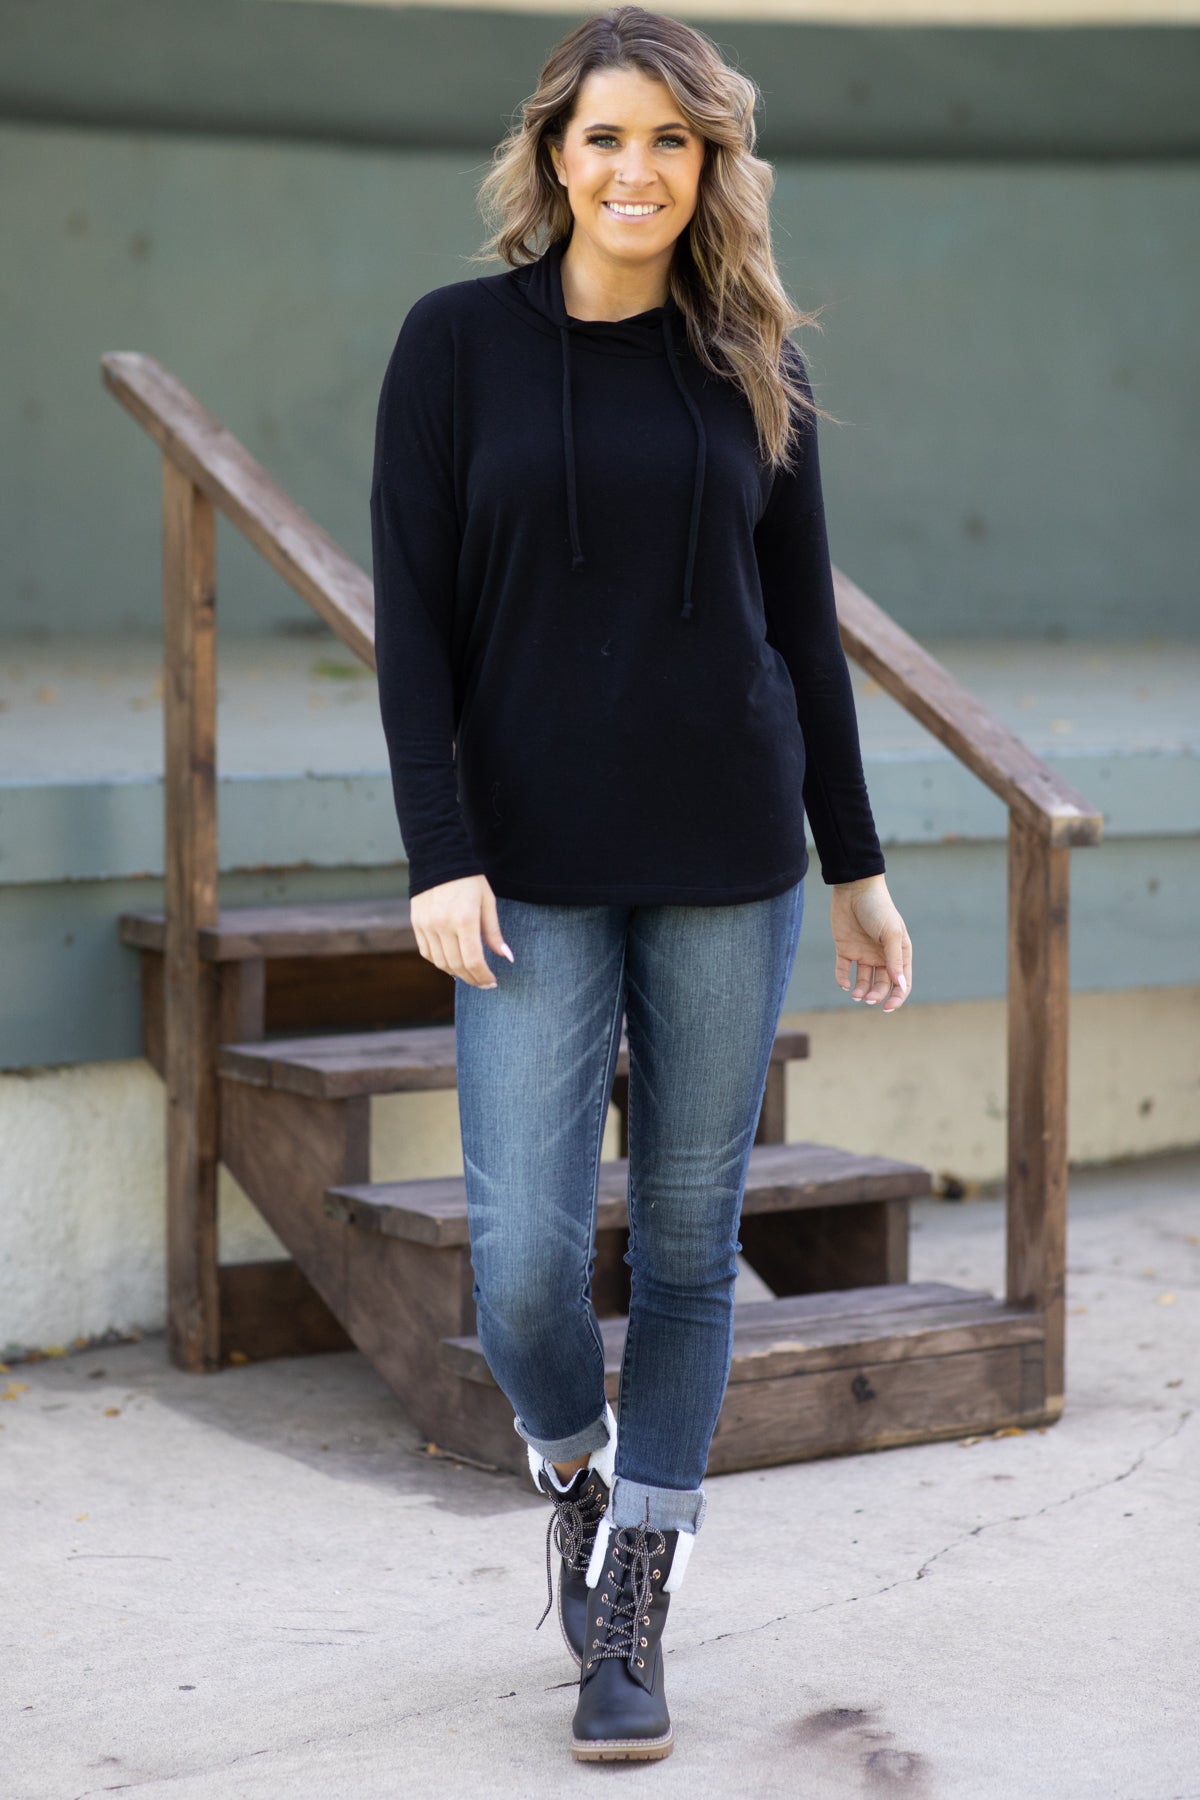 Black Heathered Cowl Neck Top - Filly Flair